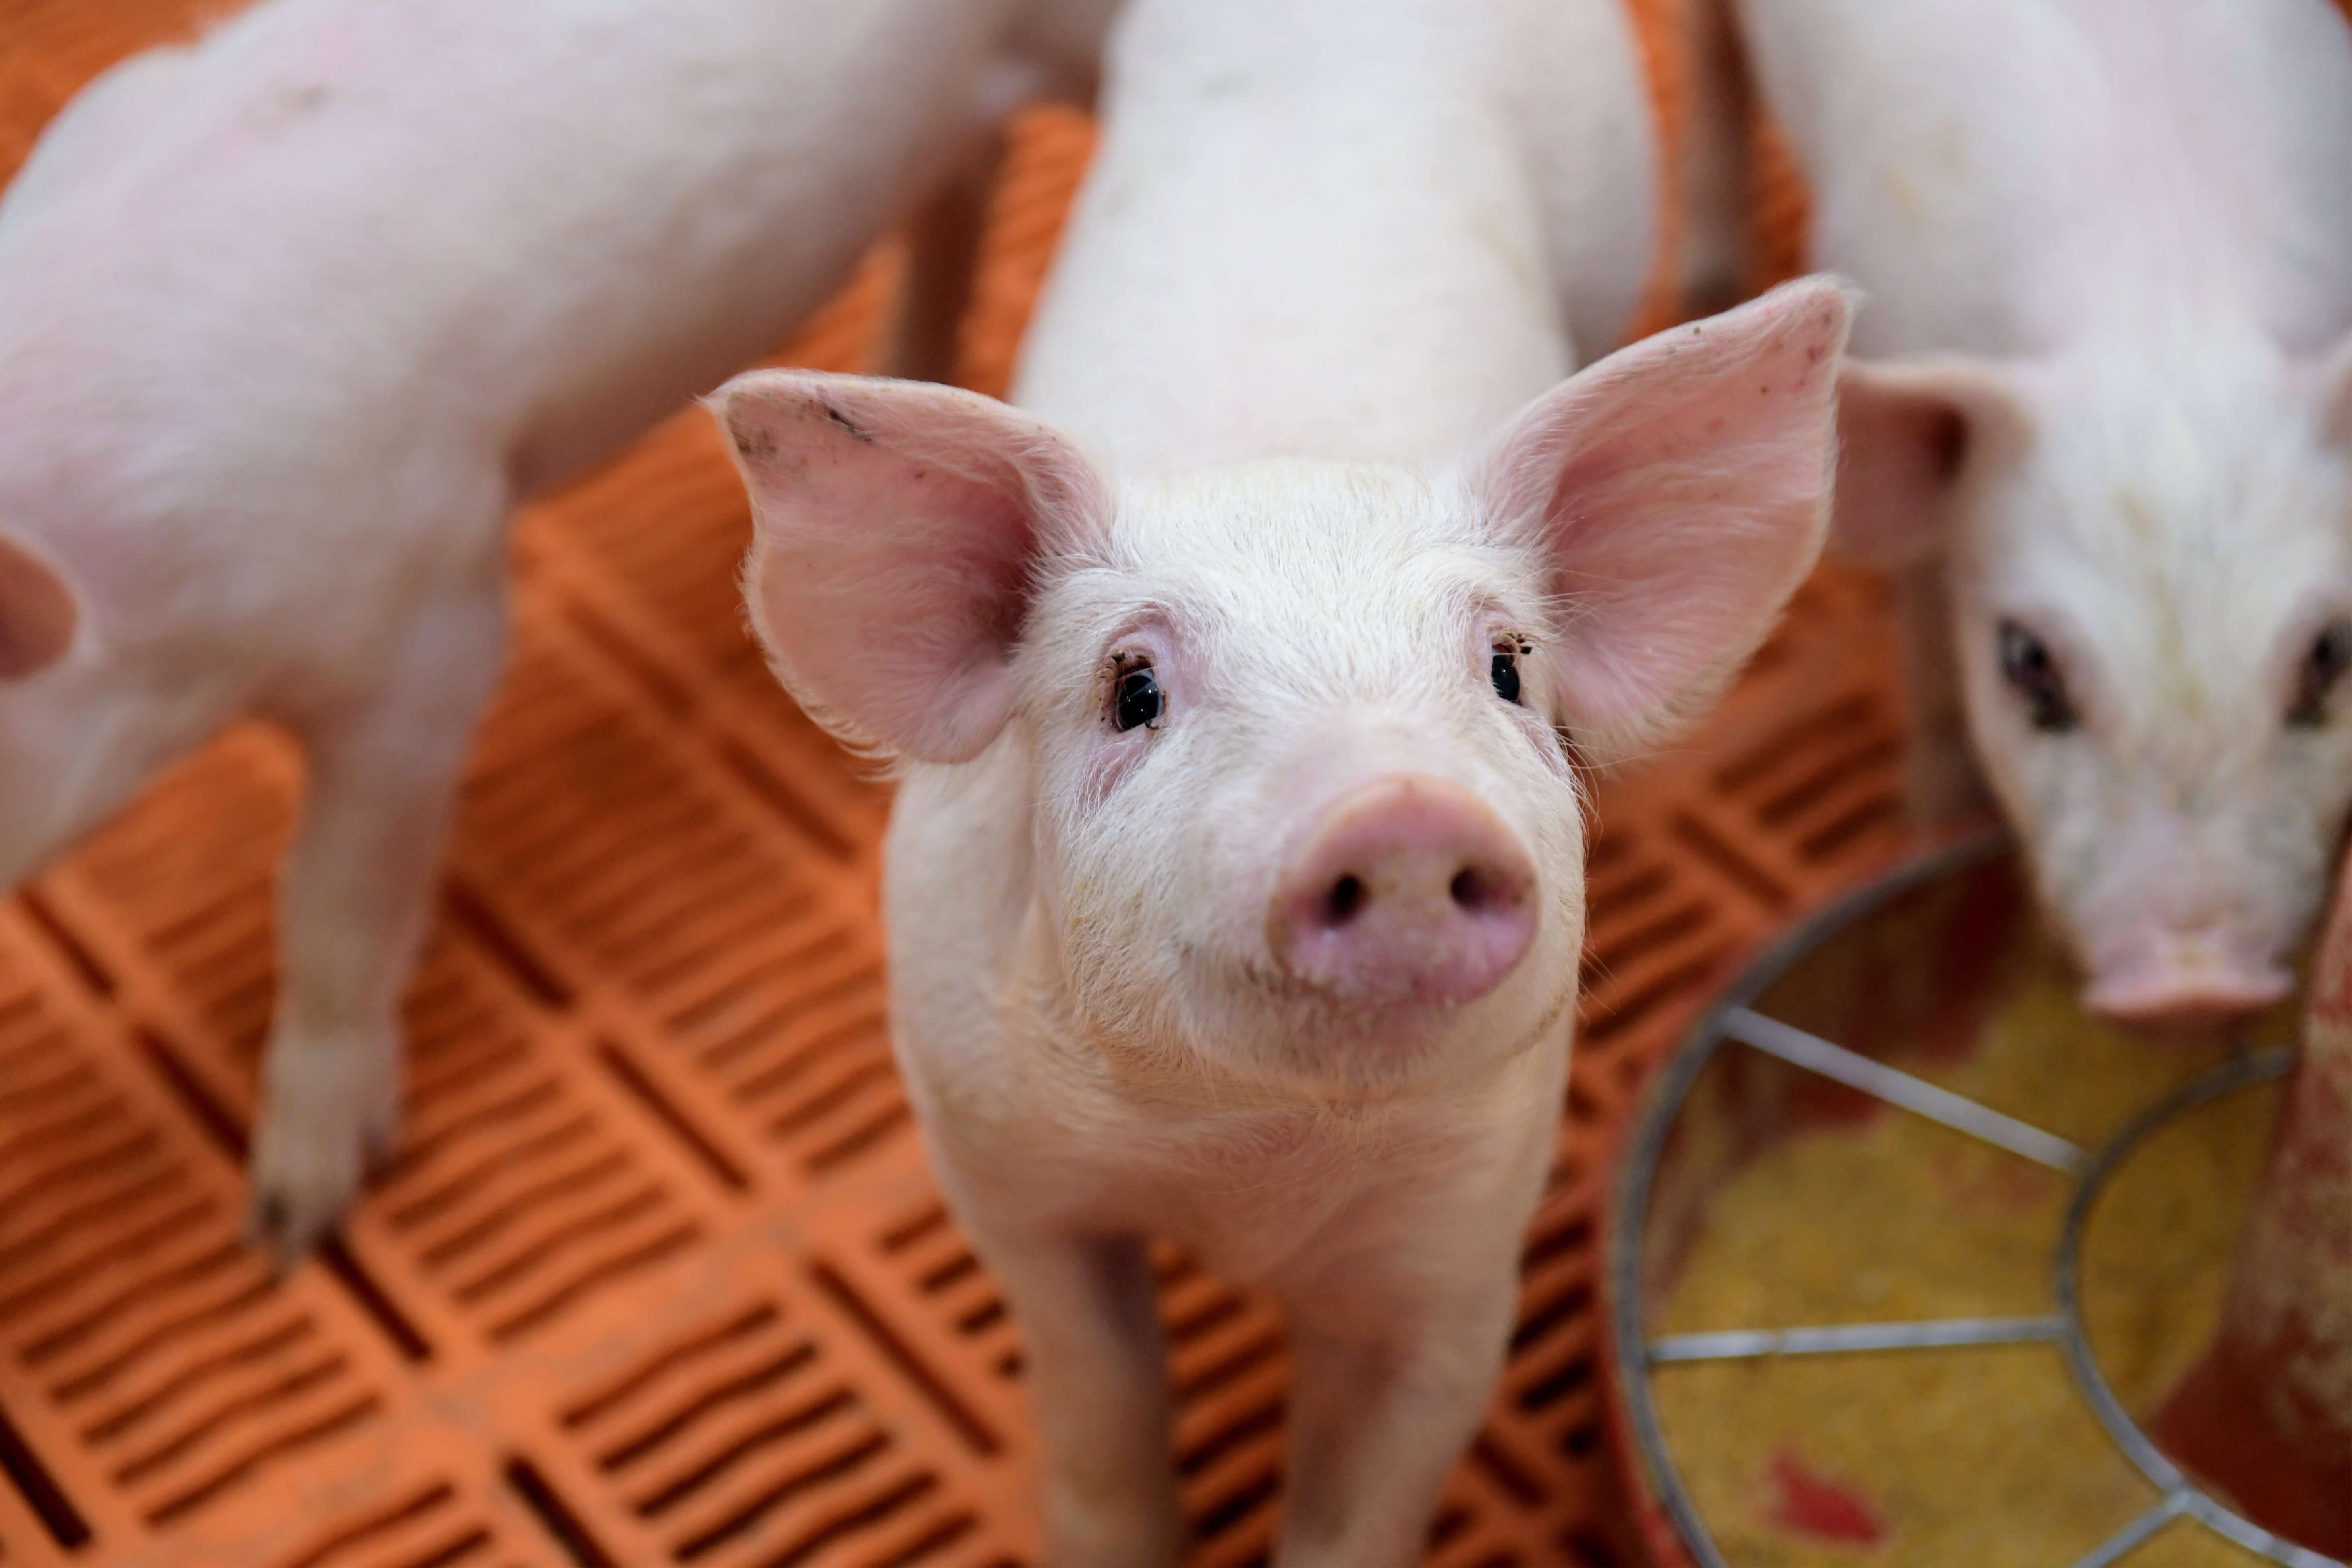 A piglet glances curiously up at the camera with two pi